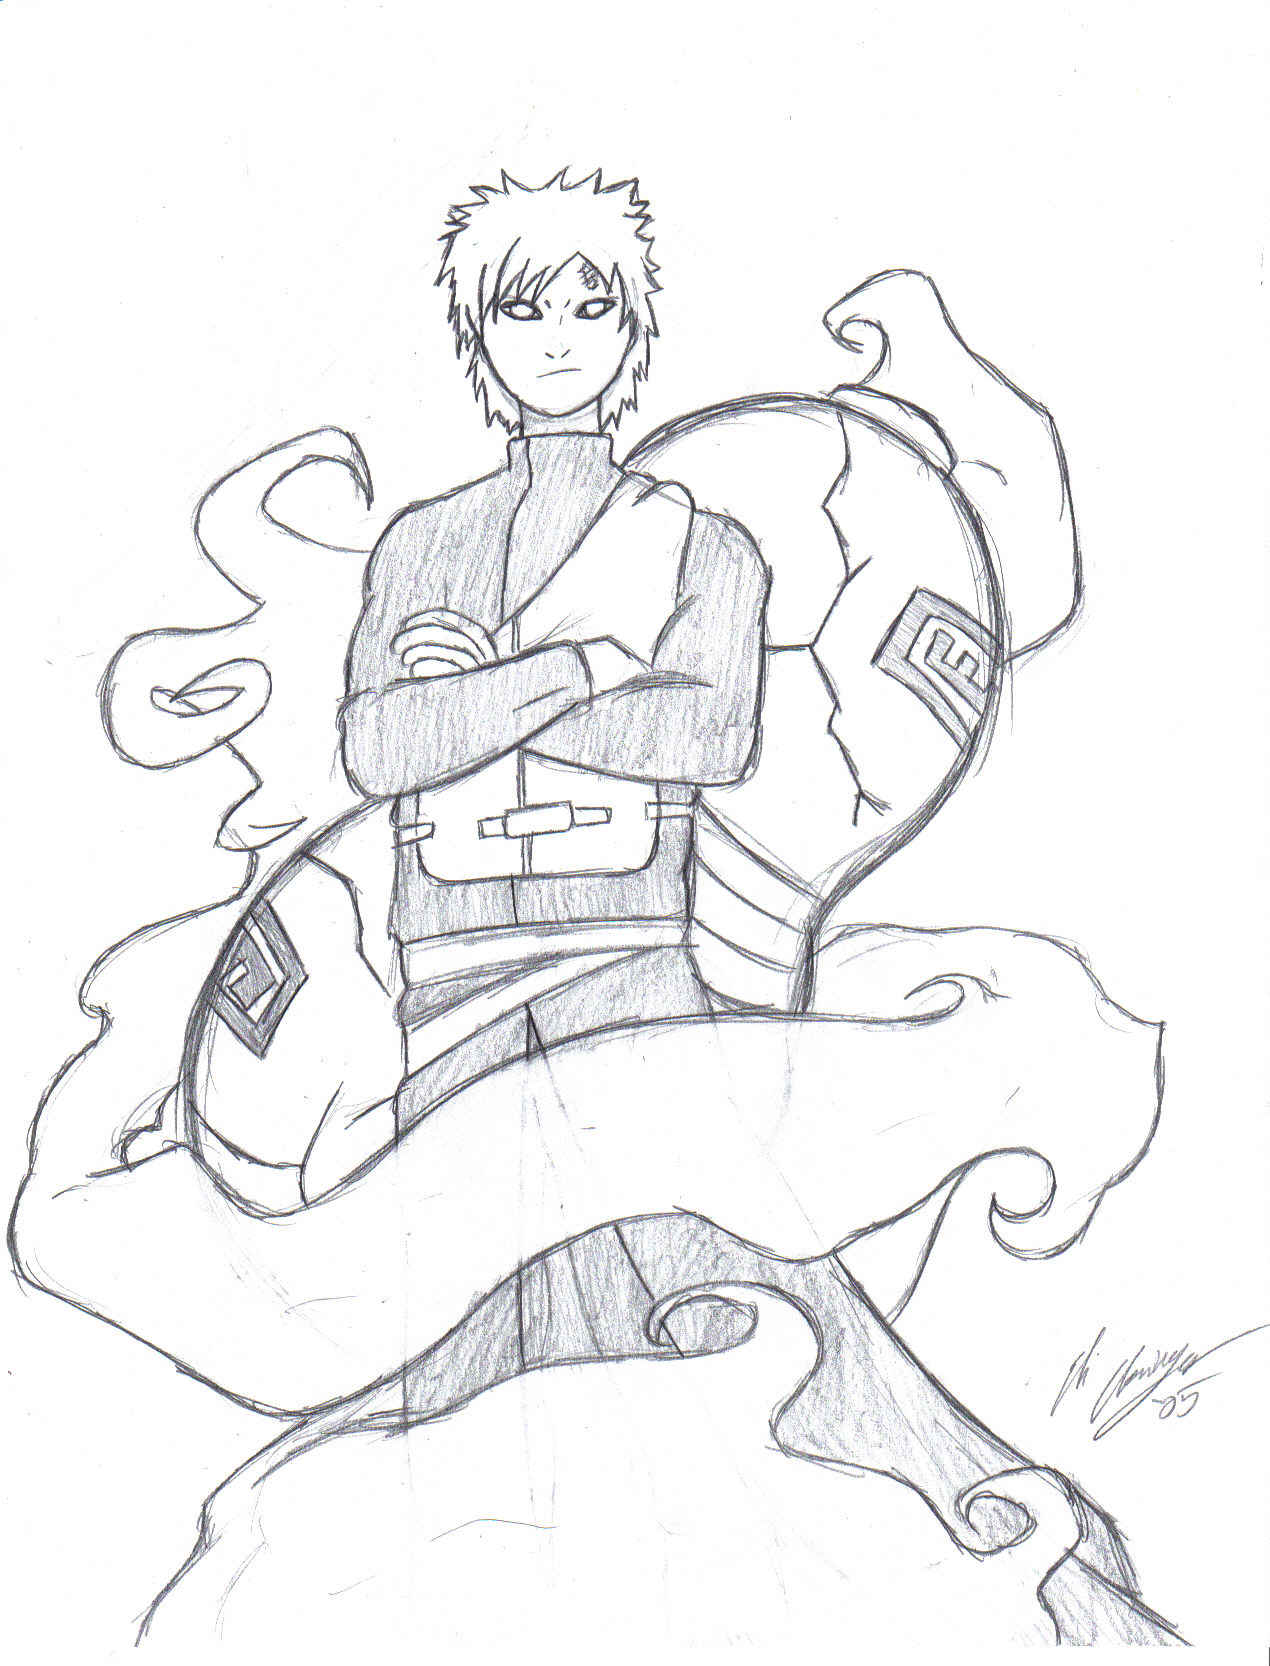 Gaara, the Kazekage of the sand by anubis316